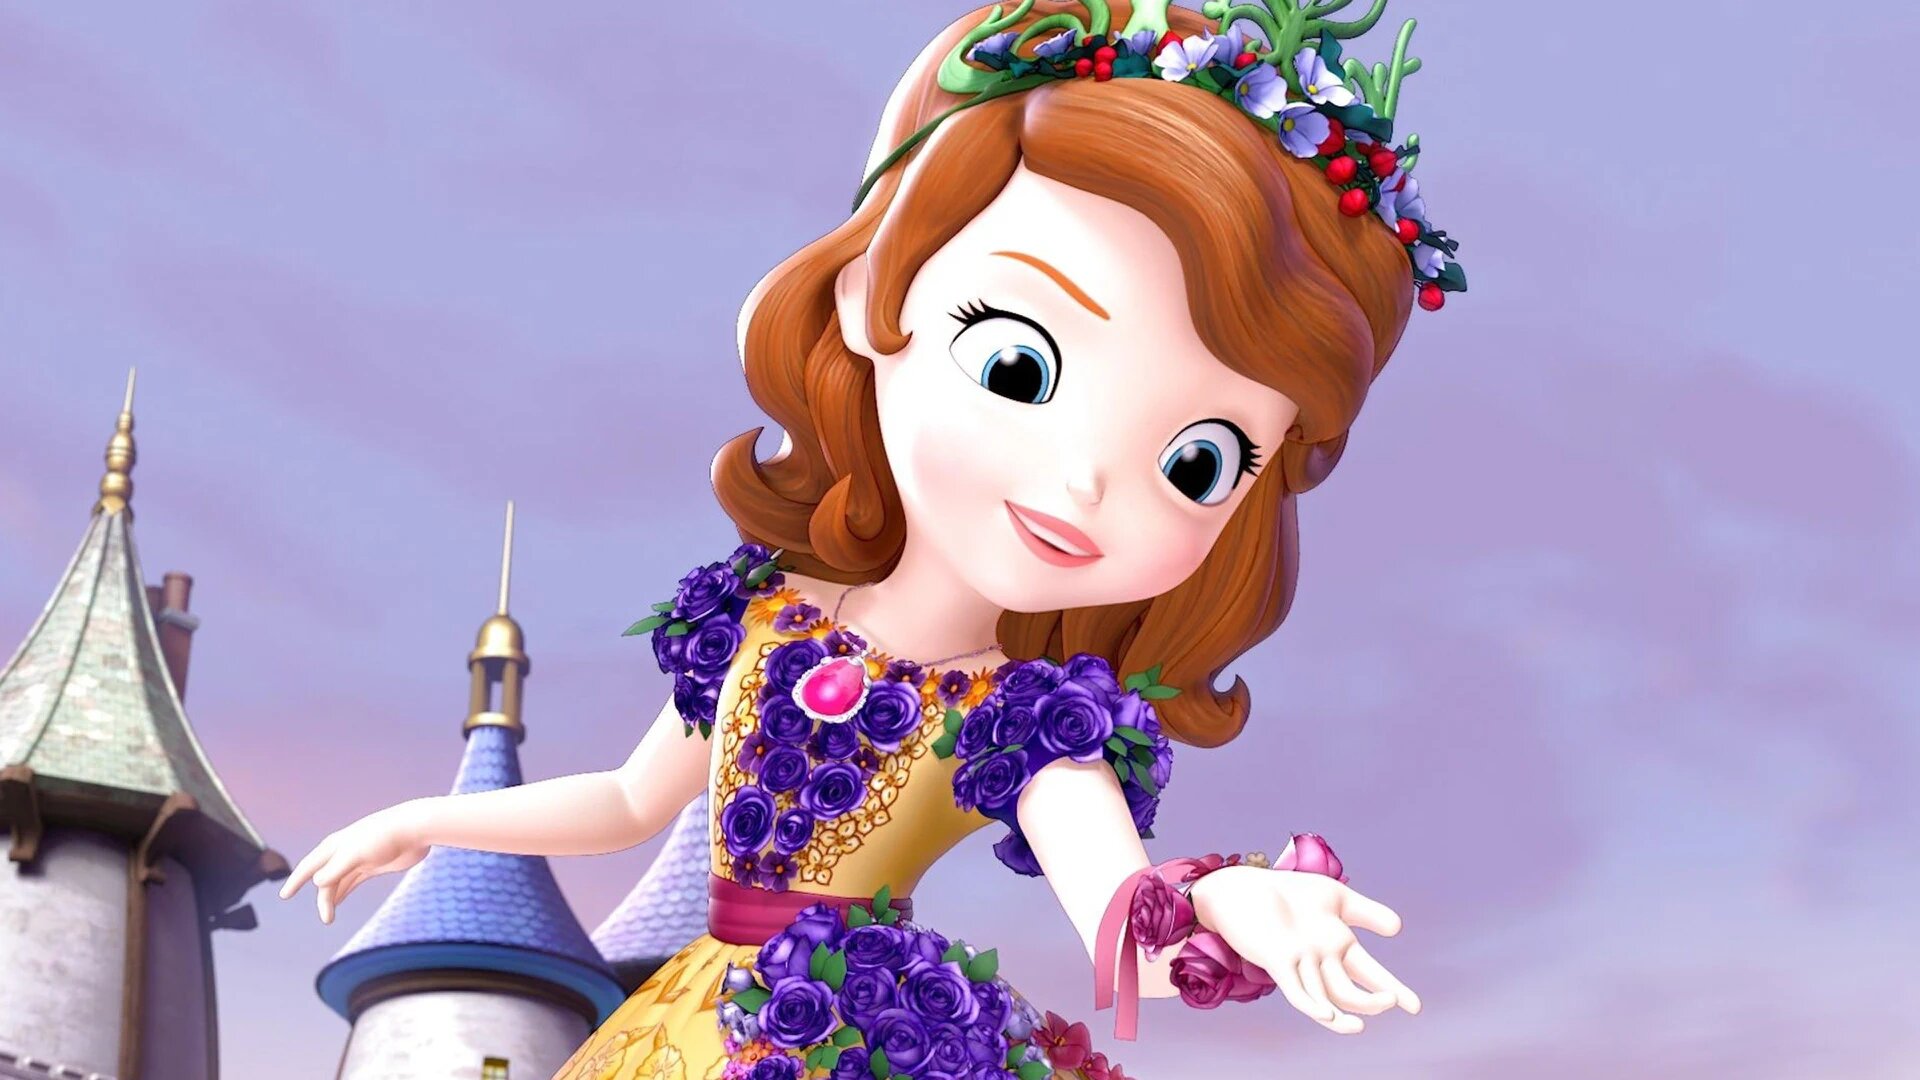 Sofia the First S4E3 The Crown of Blossoms